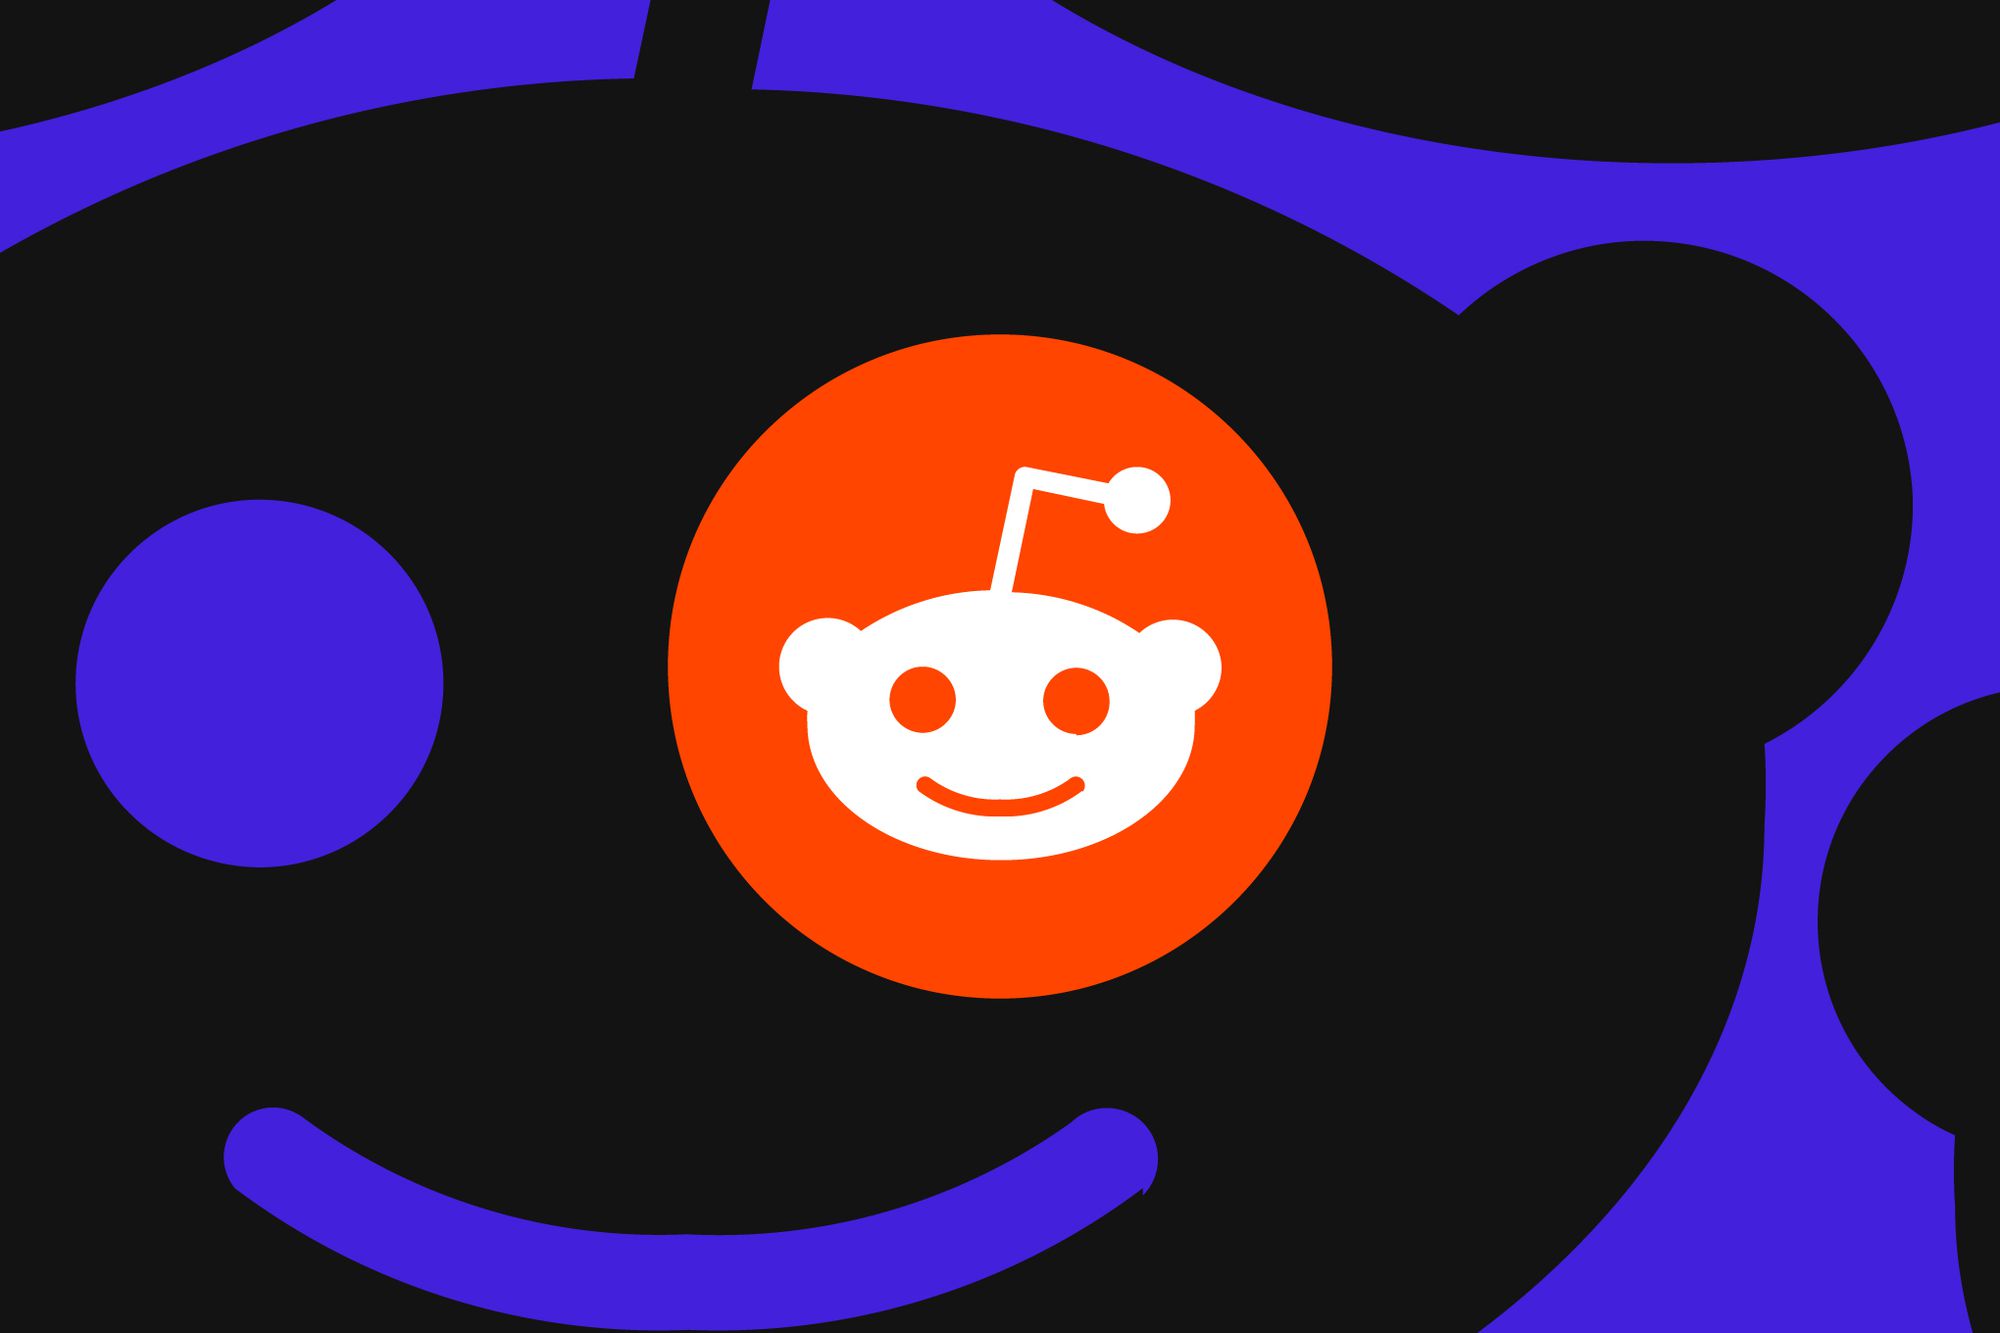 Reddit is getting rid of its Gold awards system - The Verge